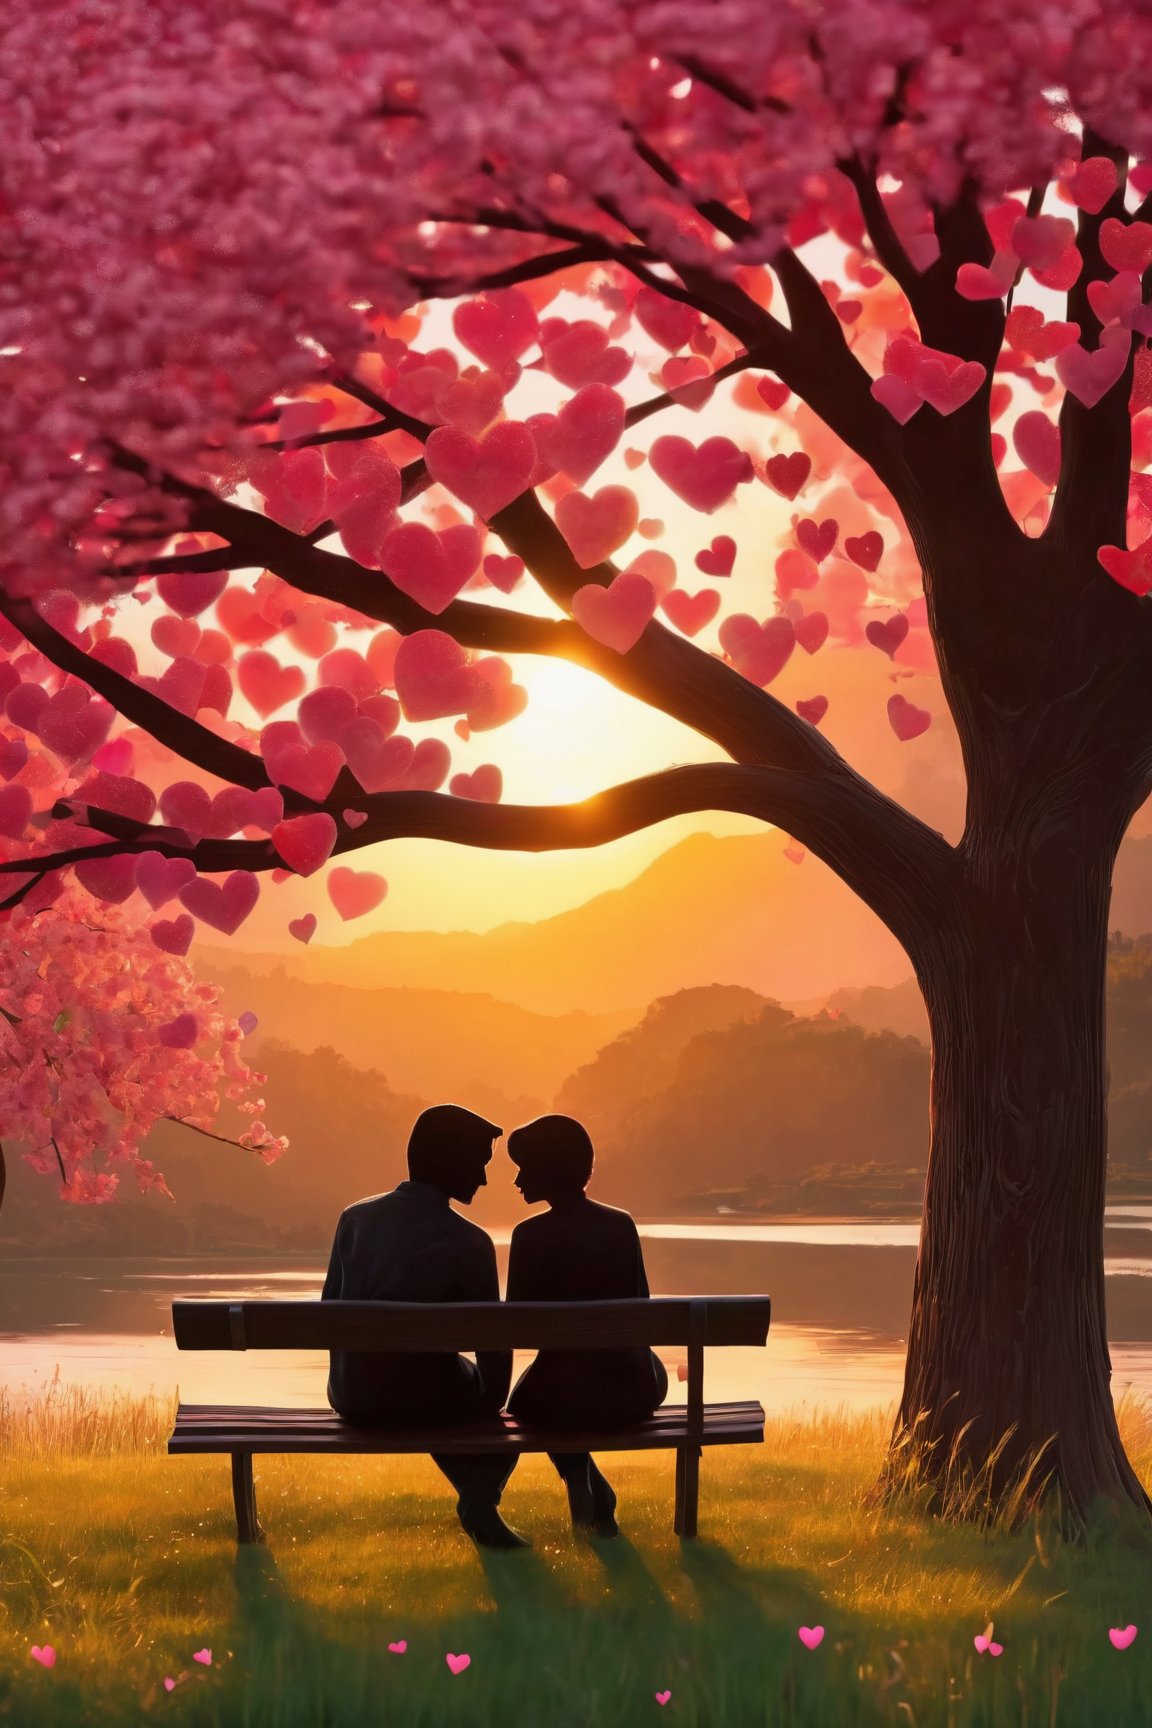 (best quality,8K,highres,masterpiece), ultra-detailed, AiArtV Valentine's Day setting capturing a tender moment between a couple (1 girl, 1 boy) sitting together. The scene unfolds on a serene grassy knoll under a sprawling tree, its branches forming a natural canopy above. A wooden swing hangs from one of the branches, adding a whimsical touch. Between them, a heart shape is subtly implied in the arrangement of flowers on the ground, symbolizing their love. The figures are presented as silhouettes, enhancing the timeless and universal nature of the scene. The setting sun casts a soft, golden light, creating an atmosphere of warmth and romance. This artwork is a celebration of love, companionship, and the simple joy of being together in a beautiful, natural setting.